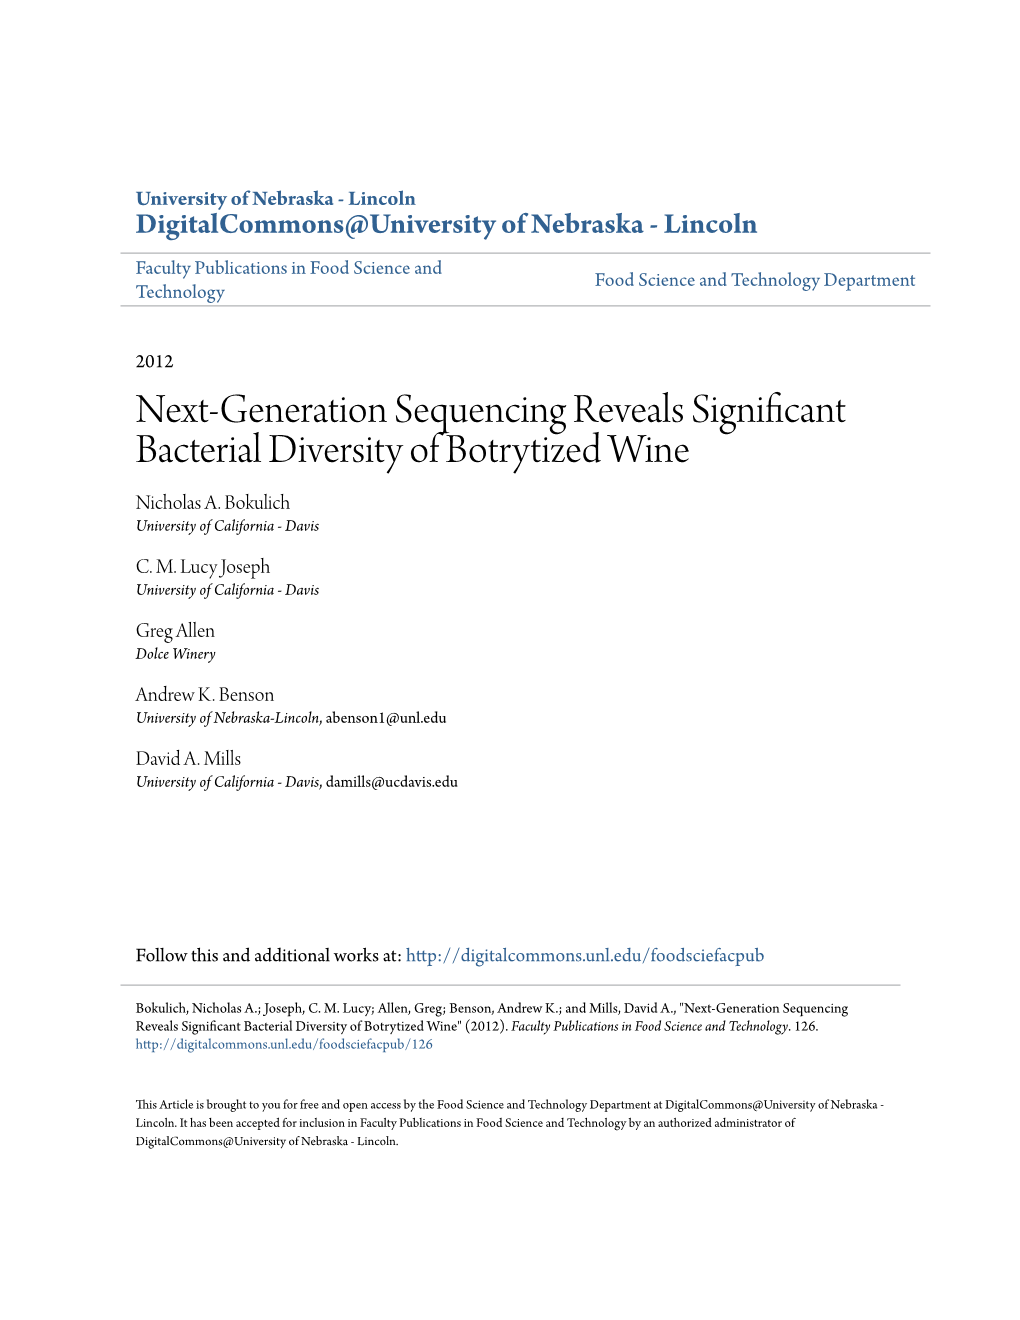 Next-Generation Sequencing Reveals Significant Bacterial Diversity of Botrytized Wine Nicholas A